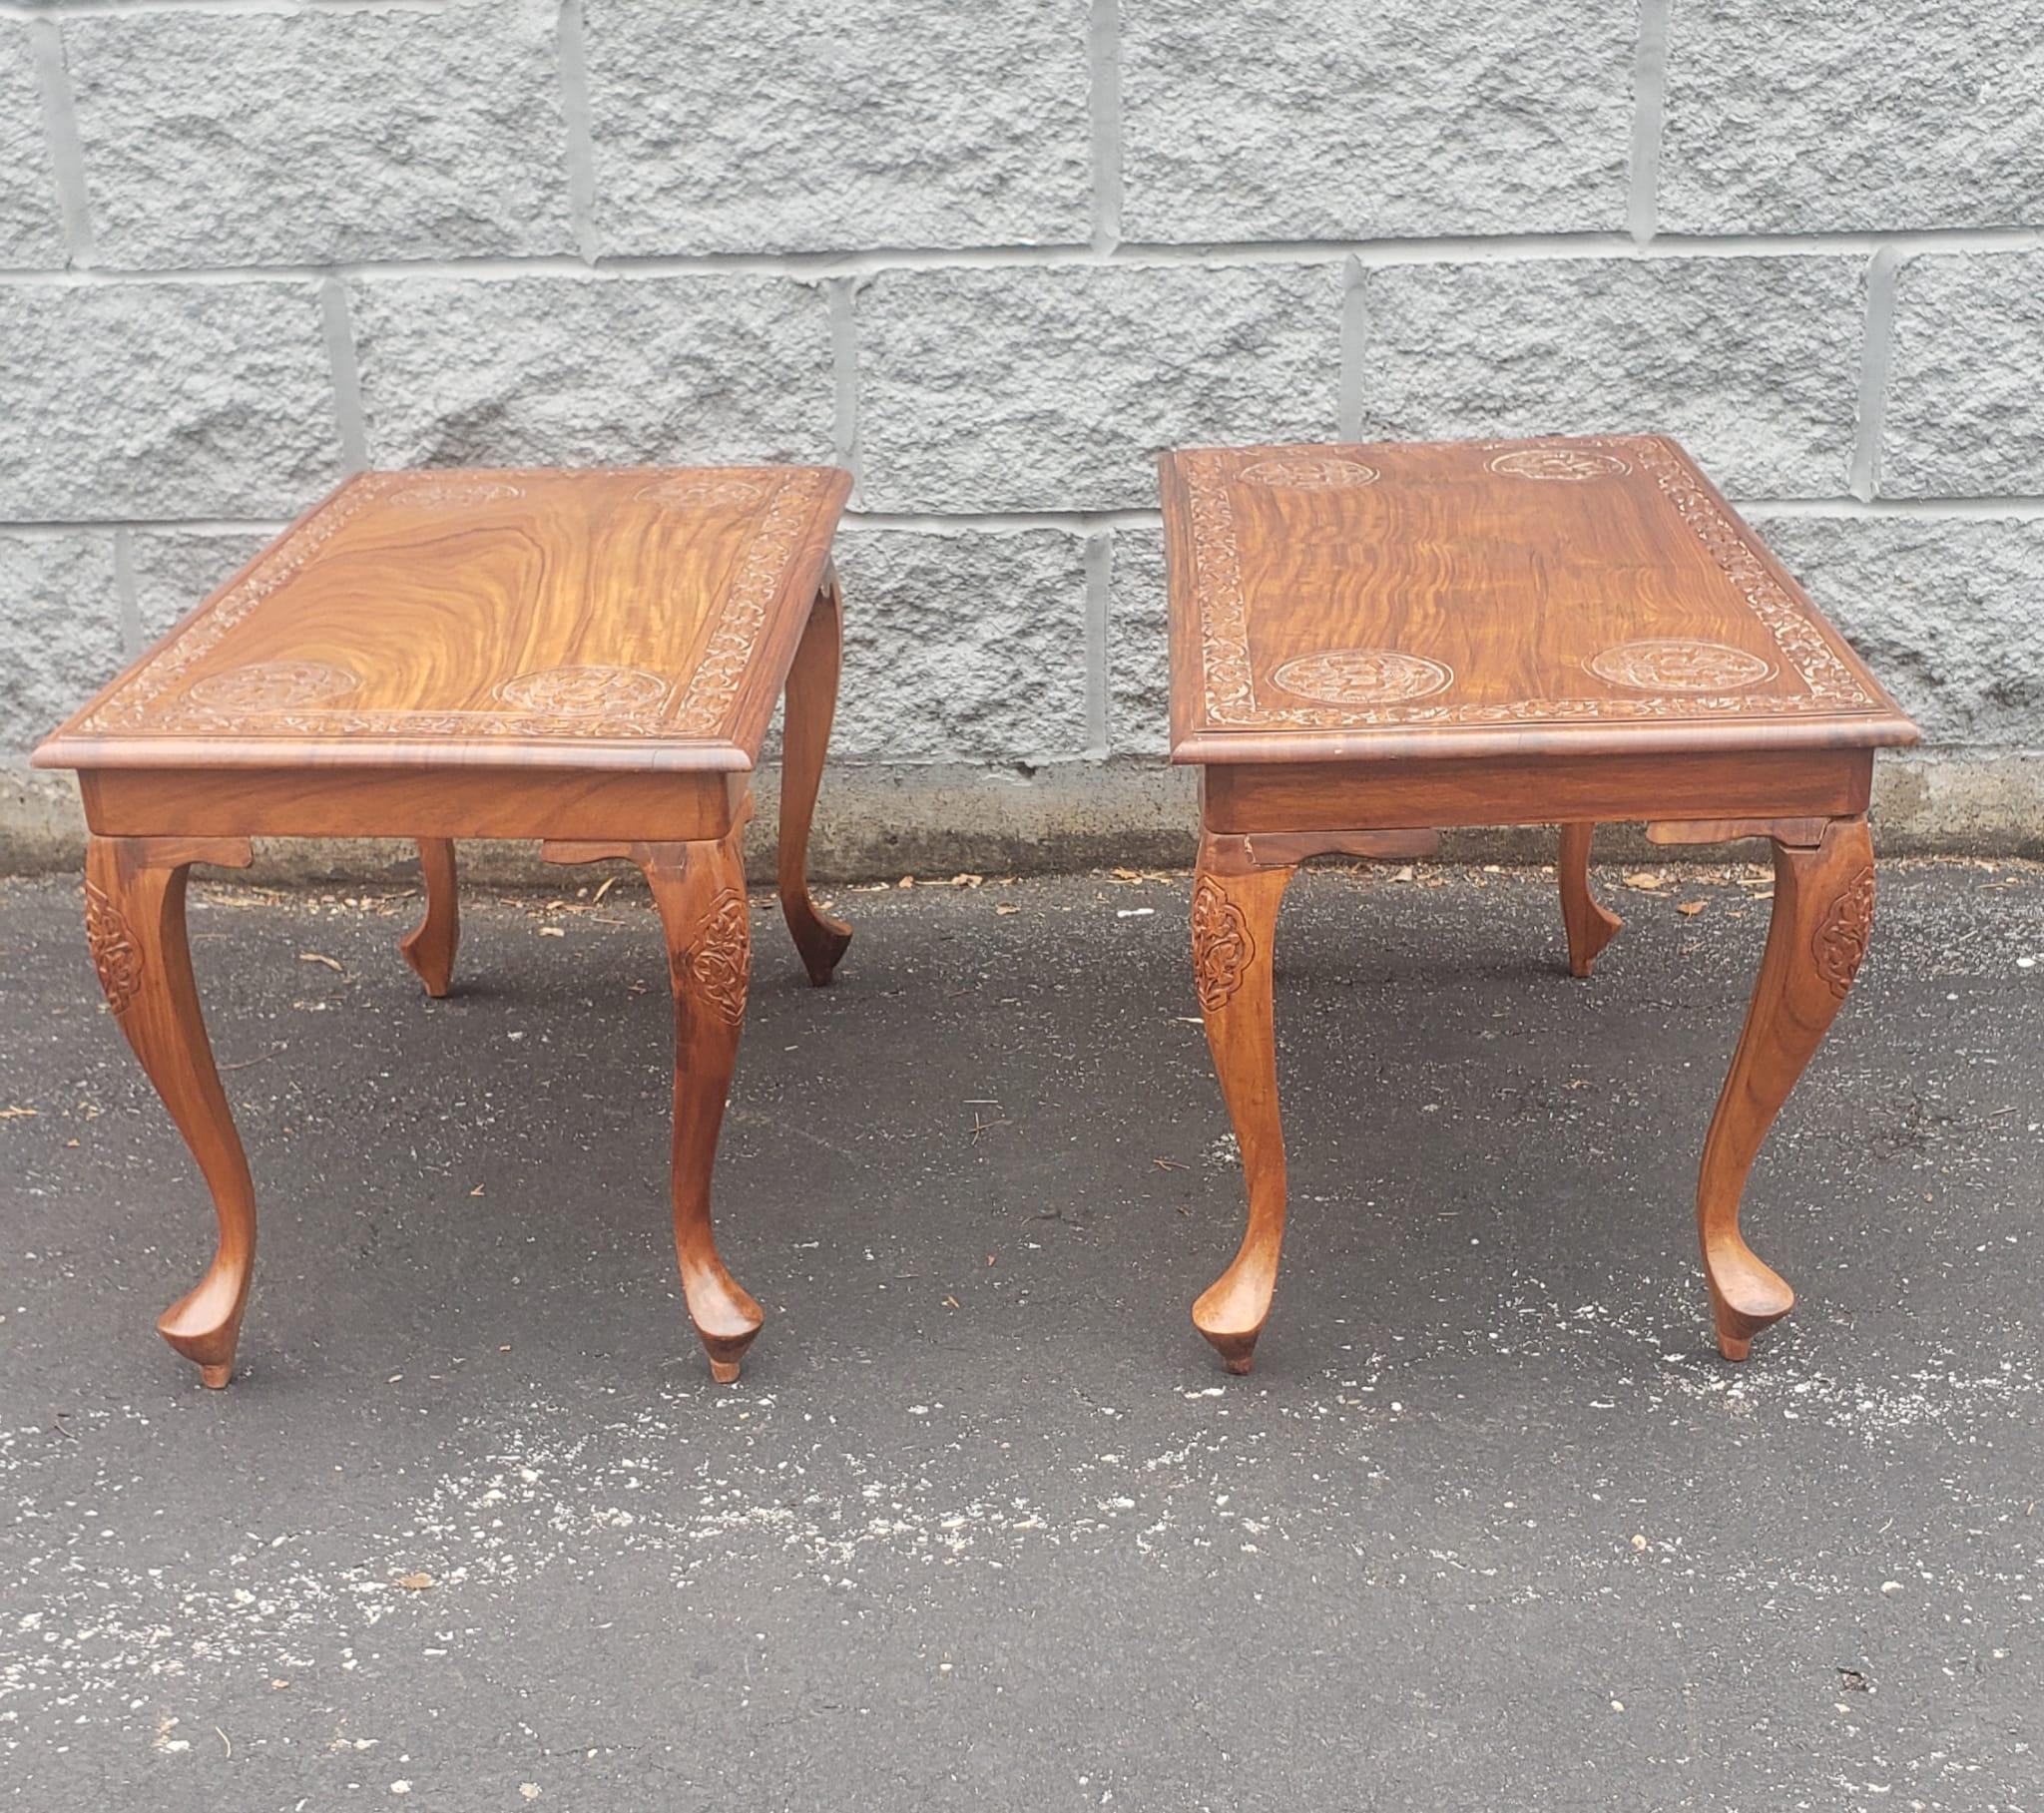 Midcentury Anglo-Japanese Carved Hardwood Low Side Tables, a Pair For Sale 1